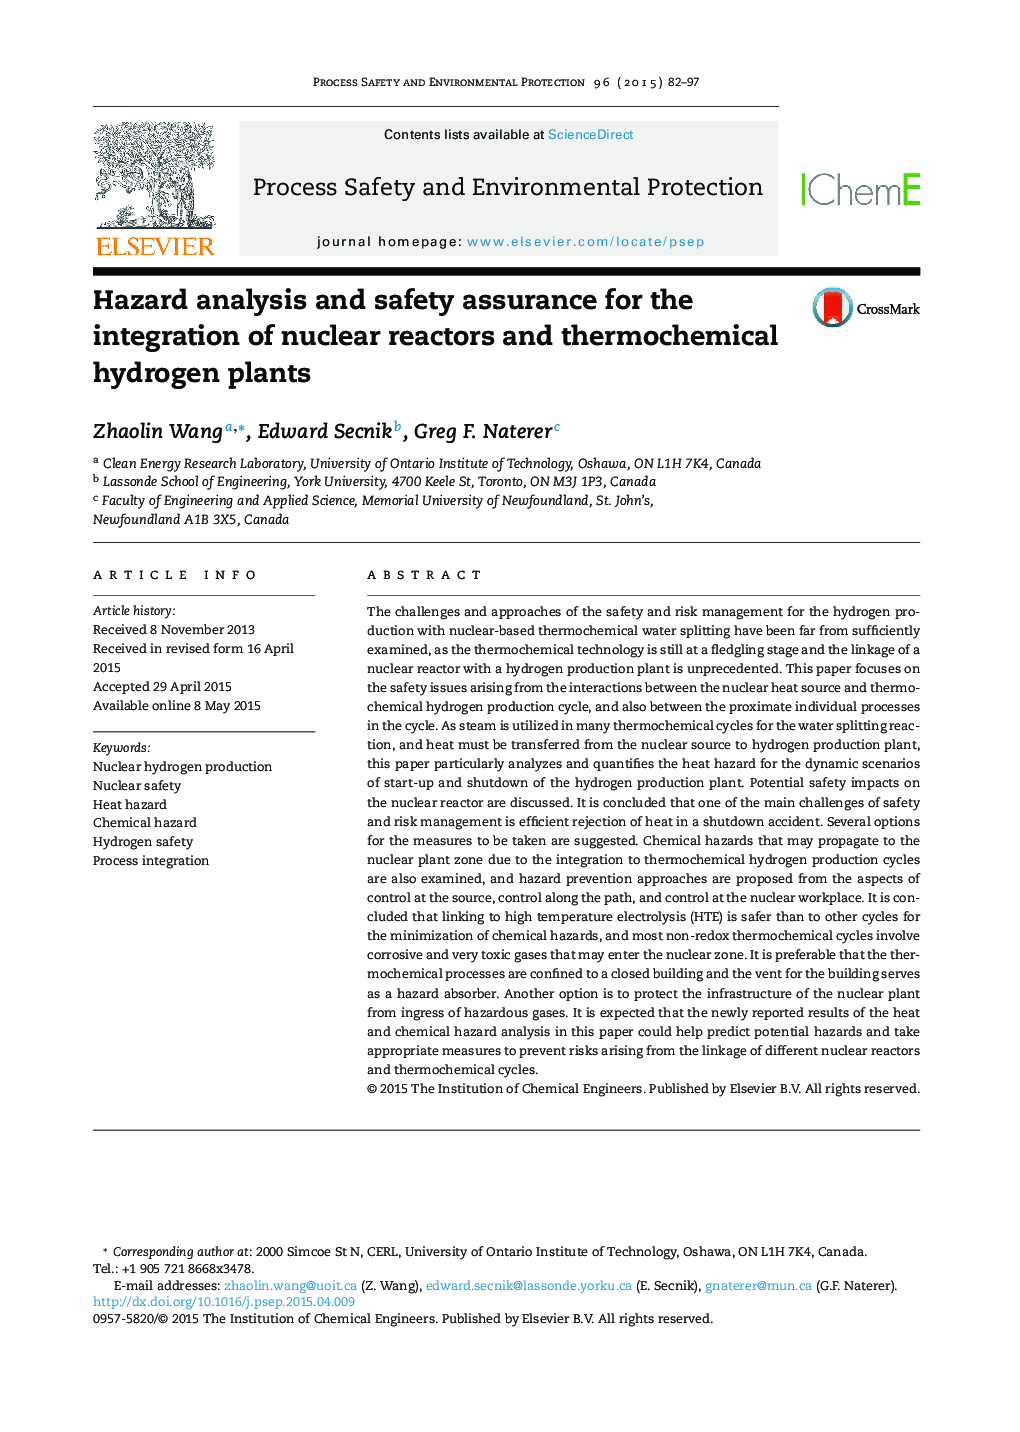 Hazard analysis and safety assurance for the integration of nuclear reactors and thermochemical hydrogen plants